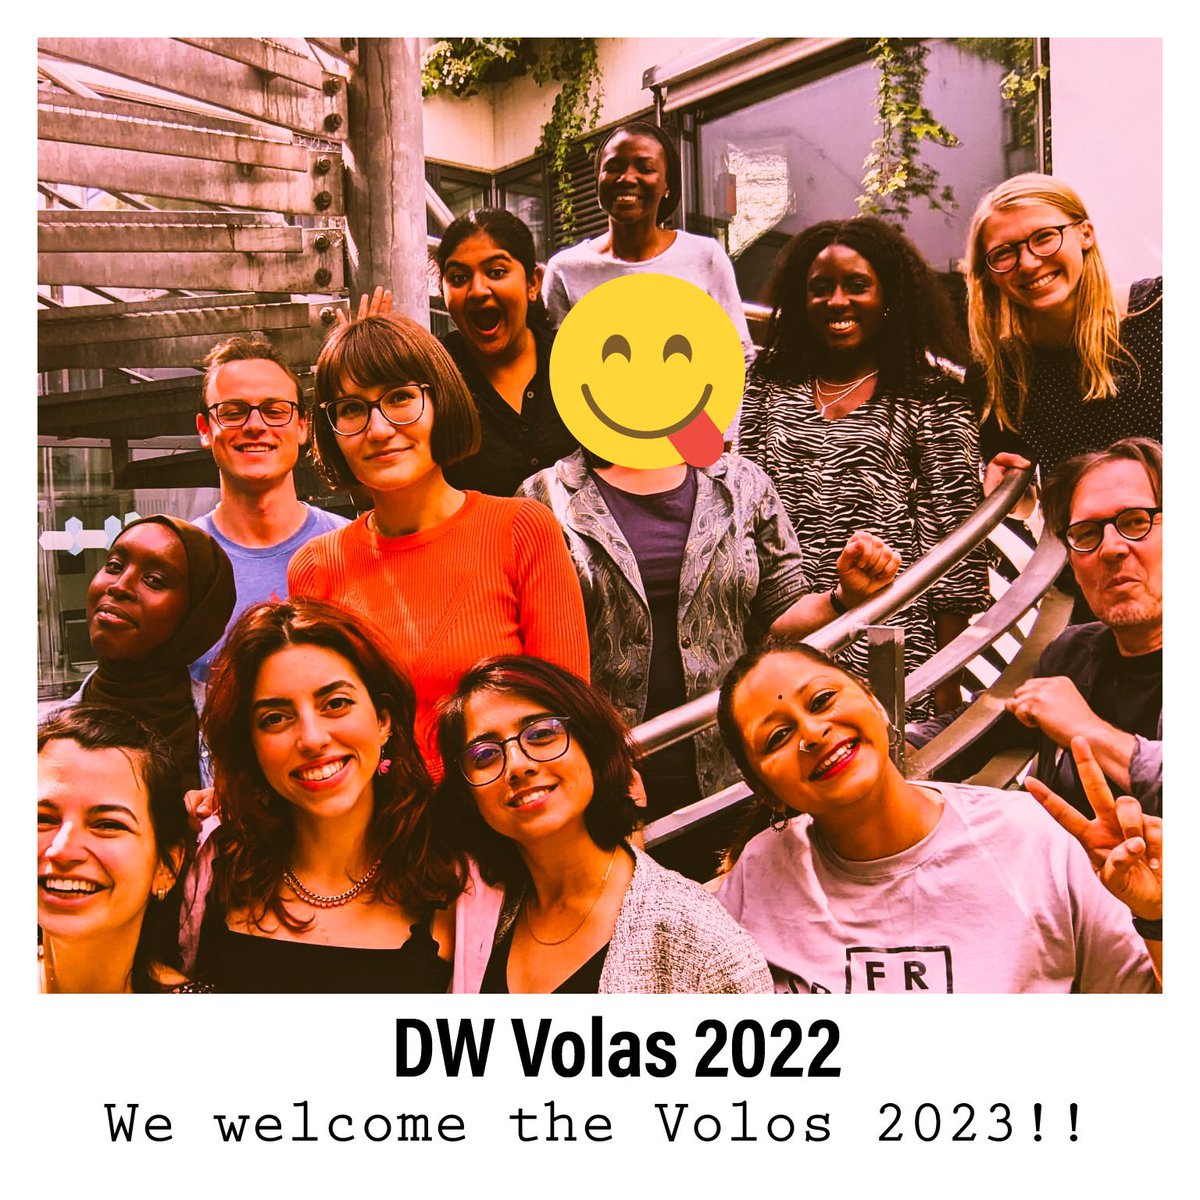 The 2022 Volo batch is signing off. We learned a great deal, and are now onto other exciting projects. Announcing the arrival of the class of 2023 in Bonn. A warm welcome to them!